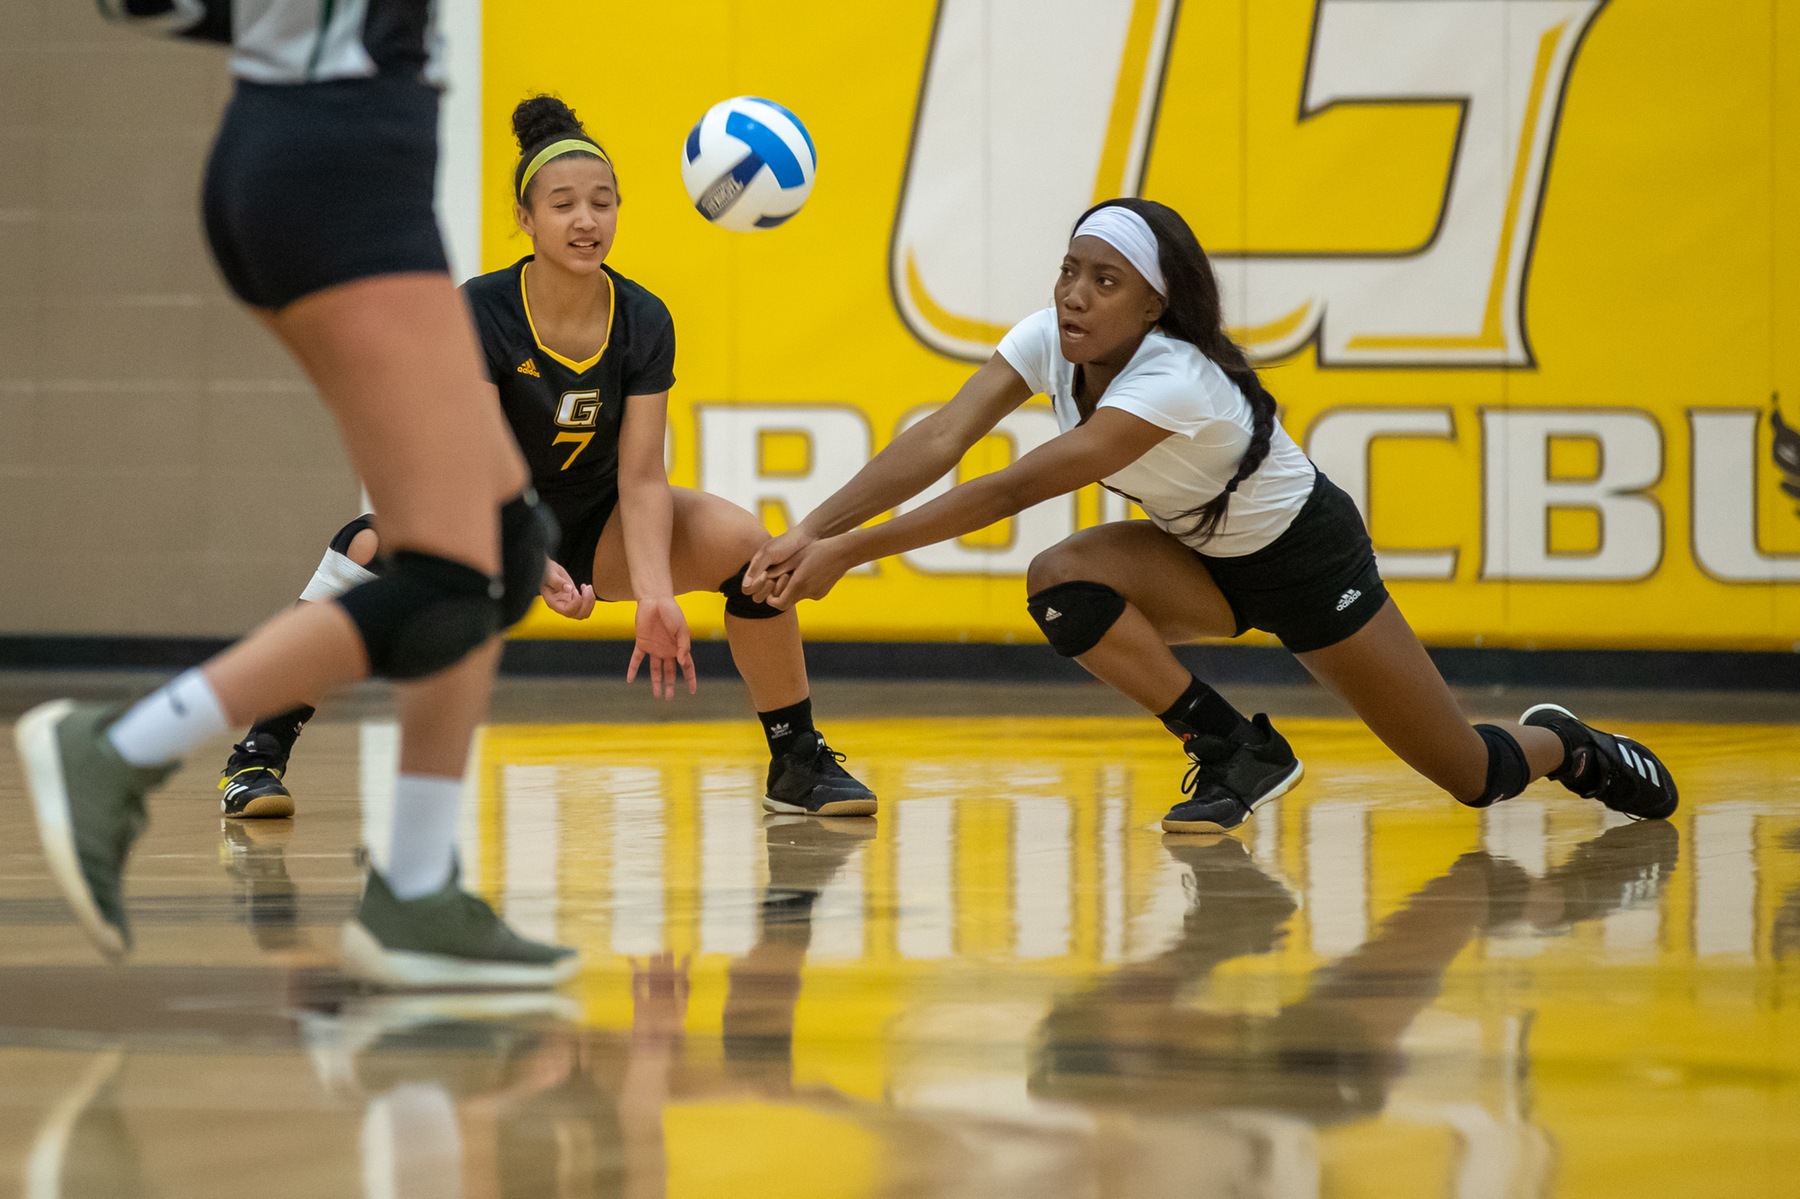 Broncbusters season ends with opening-round loss to Colby